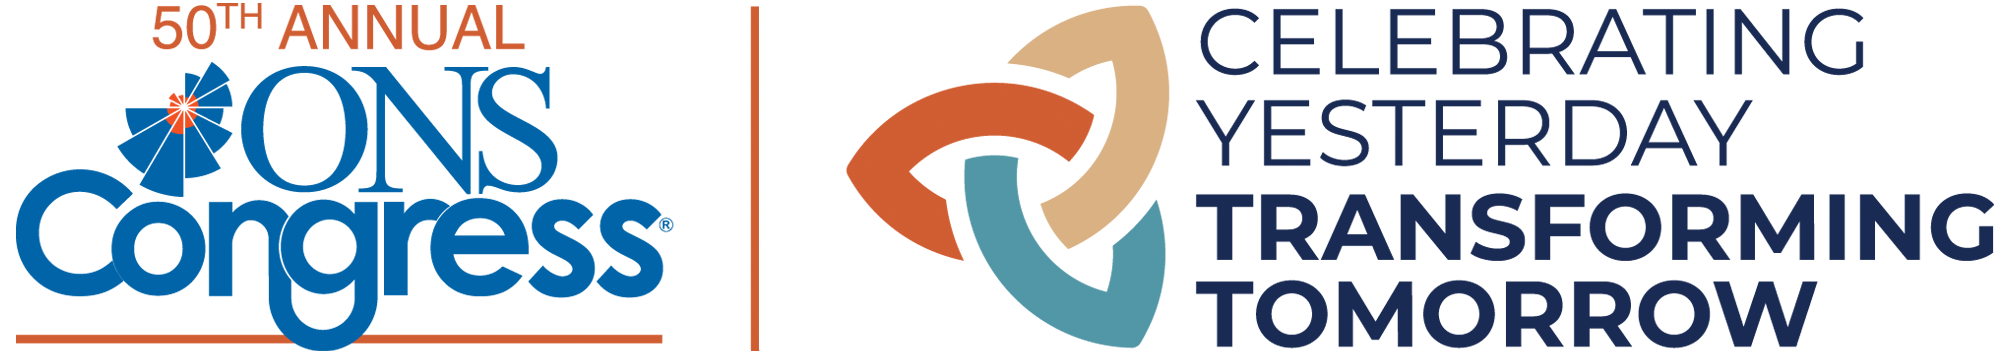 ONS Congress 2025 logo with tan, teal, and orange celtic knot symbol